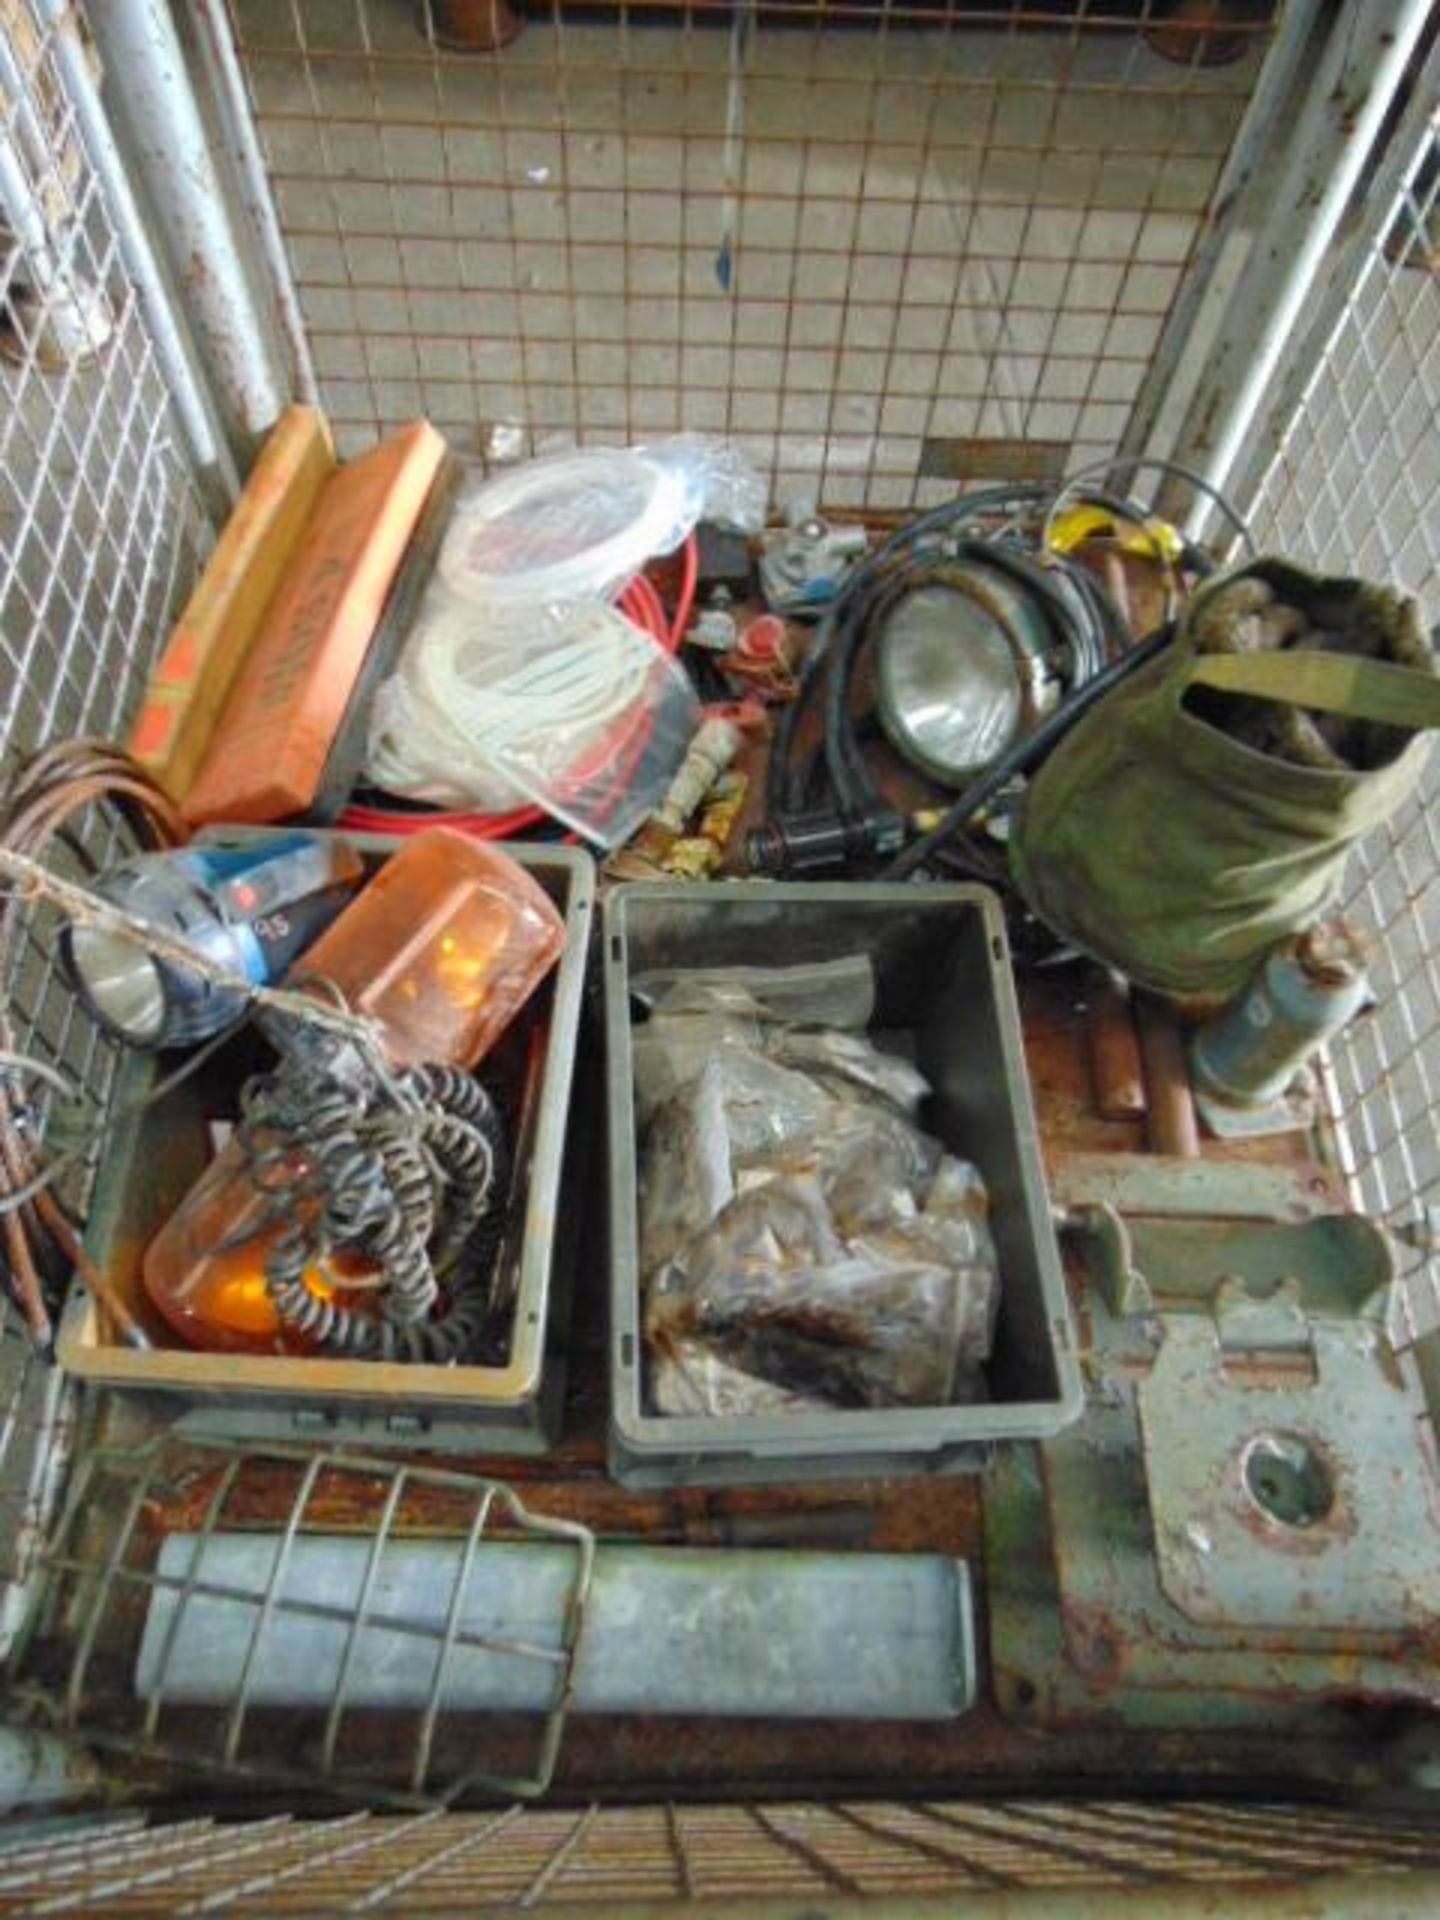 Stillage of Mixed Vehicle Parts/Accessories - Image 2 of 5